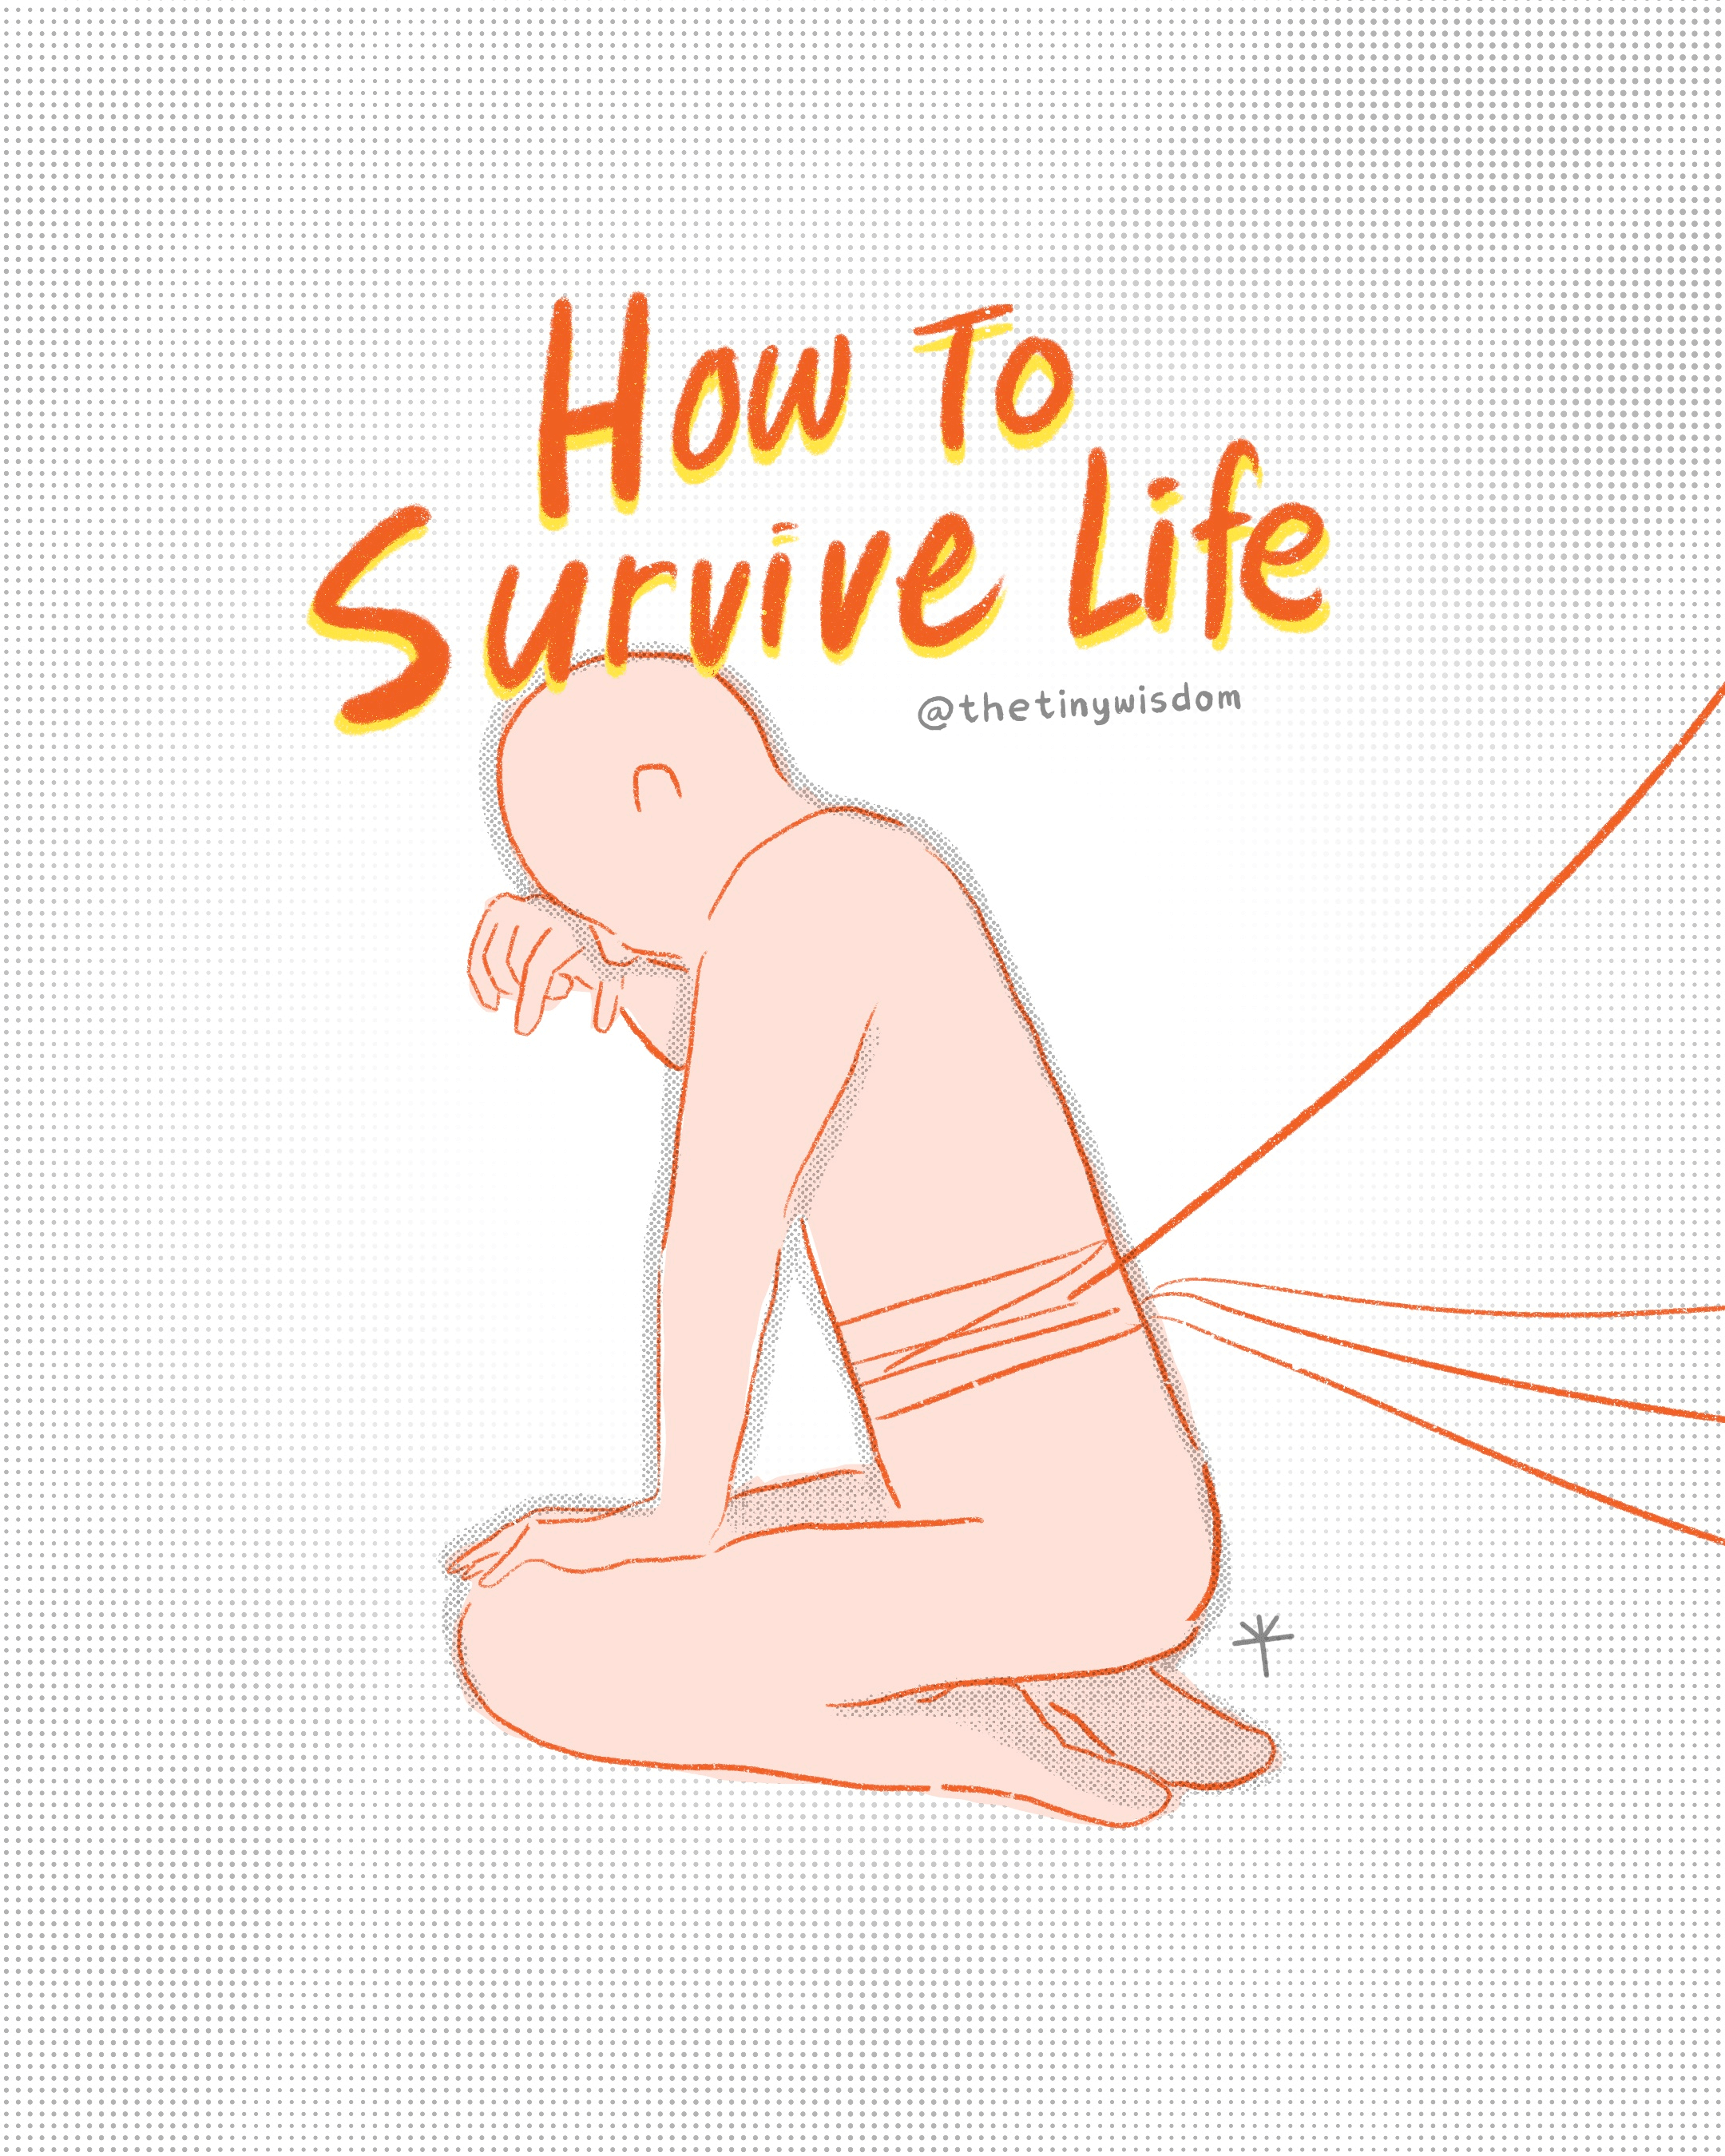 How to survive life